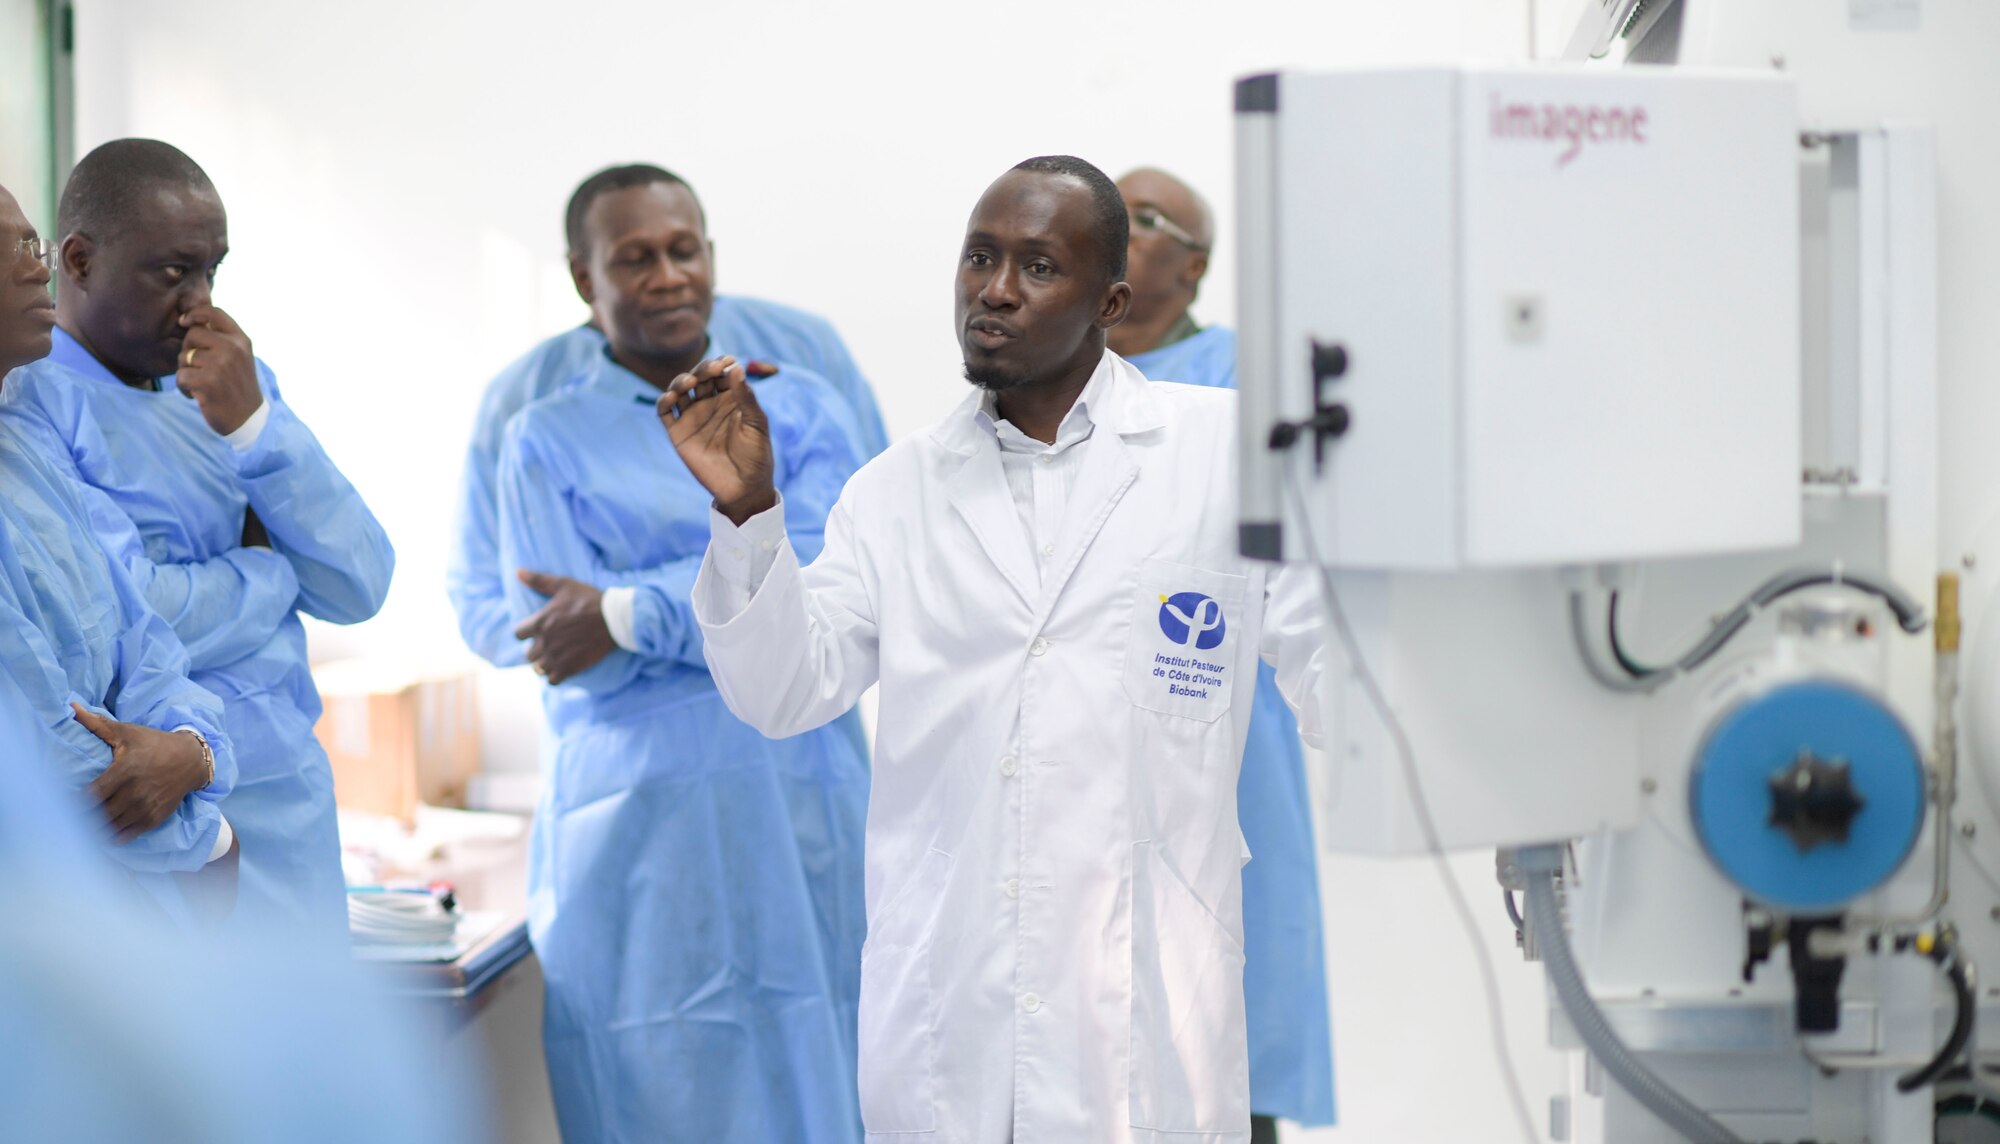 A member of the Pasteur Institute Lab gives a tour of the facility for participants of the African Partner Outbreak Response Alliance in Abidjan, Côte d'Ivoire, Nov. 20, 2019.